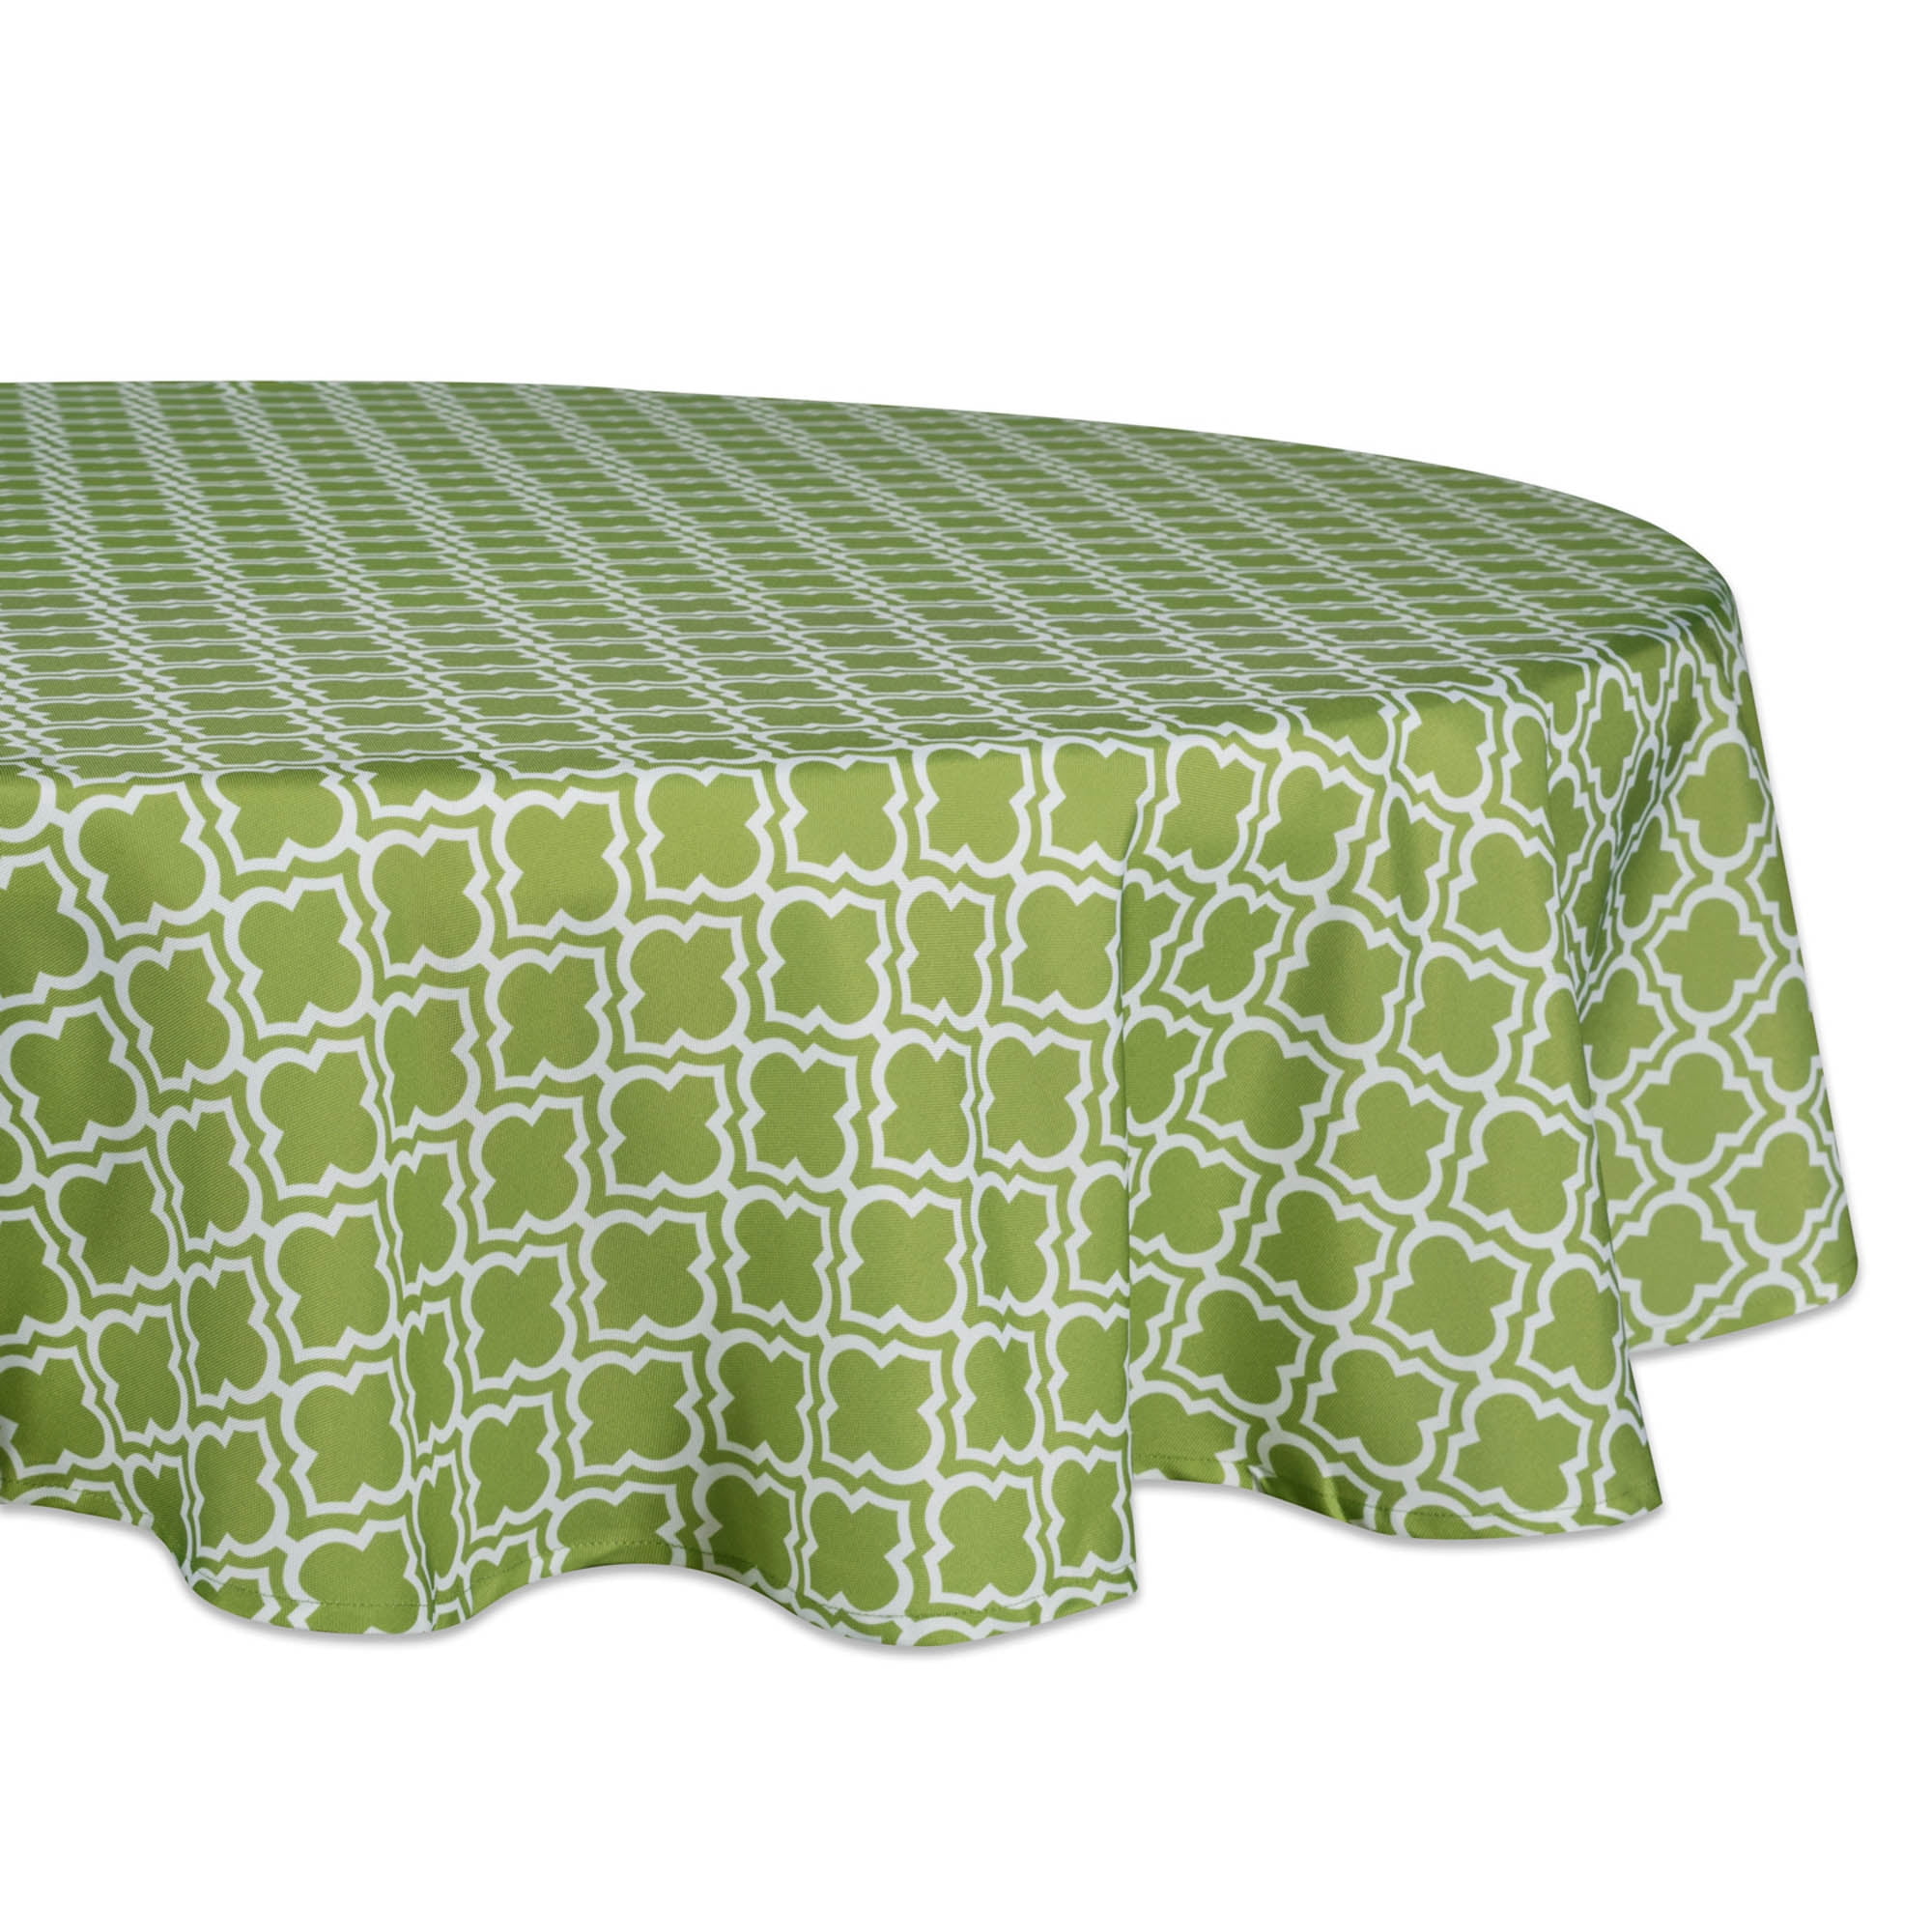 DII Banana Leaf Outdoor Tablecloth With Zipper 52 Round 